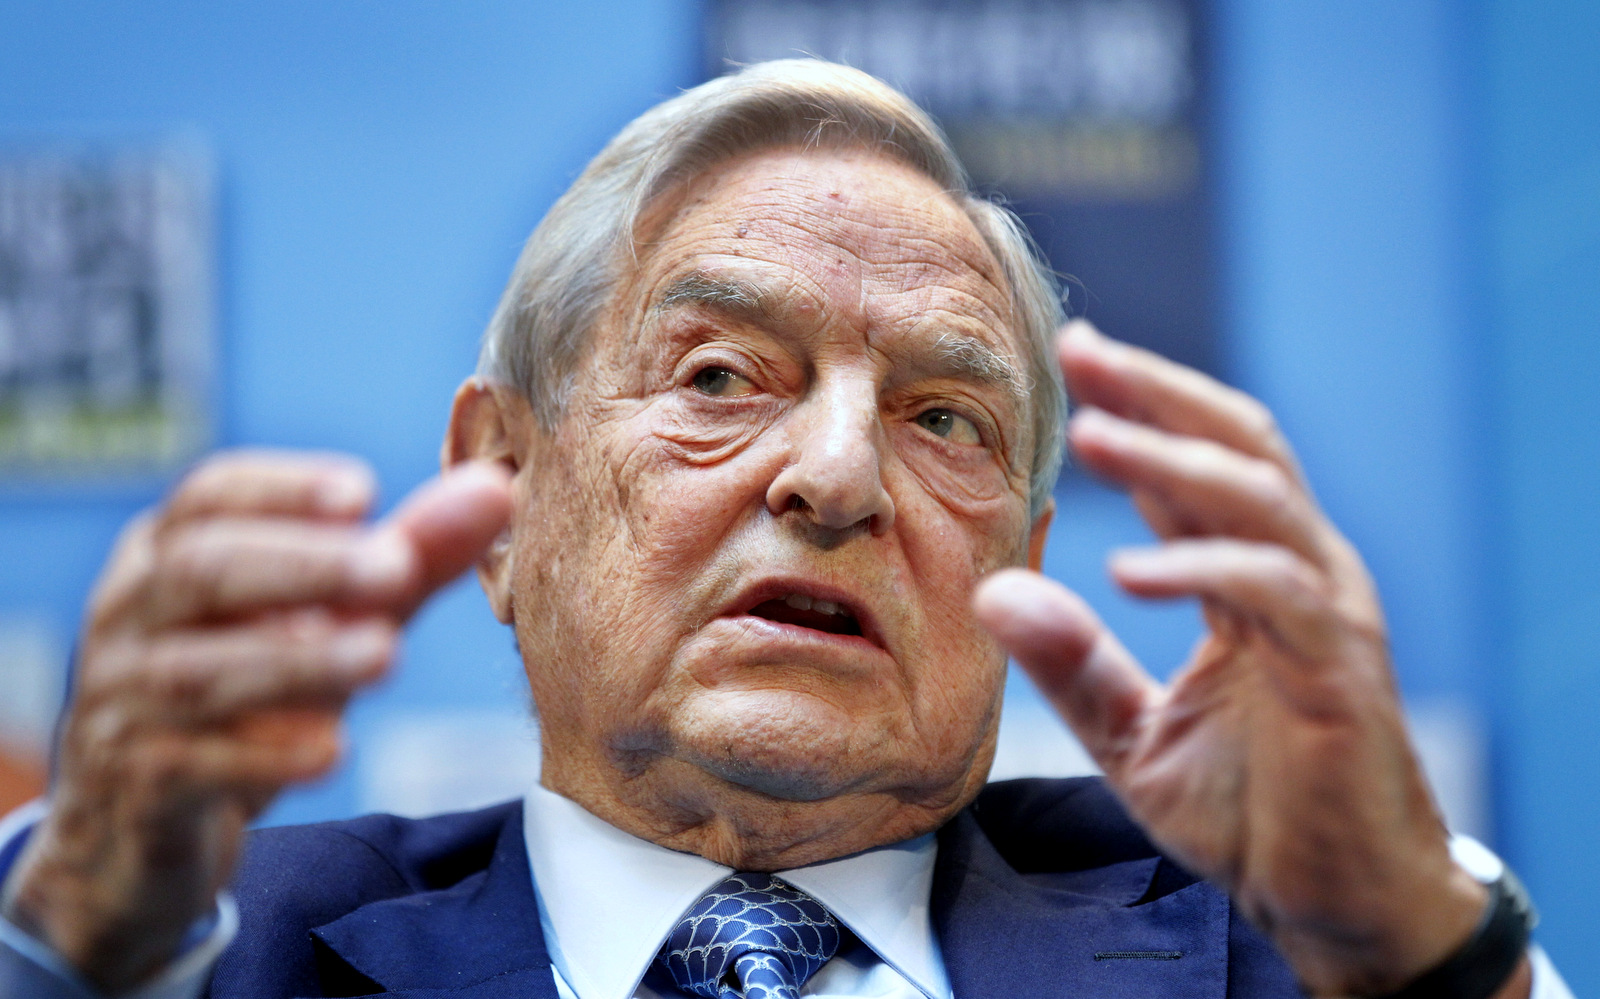 George Soros supported Obama during his 2008 election and 2012 re-election campaigns, but has now become Hillary Clinton's biggest donor.(AP Photo Manuel Balce Ceneta)